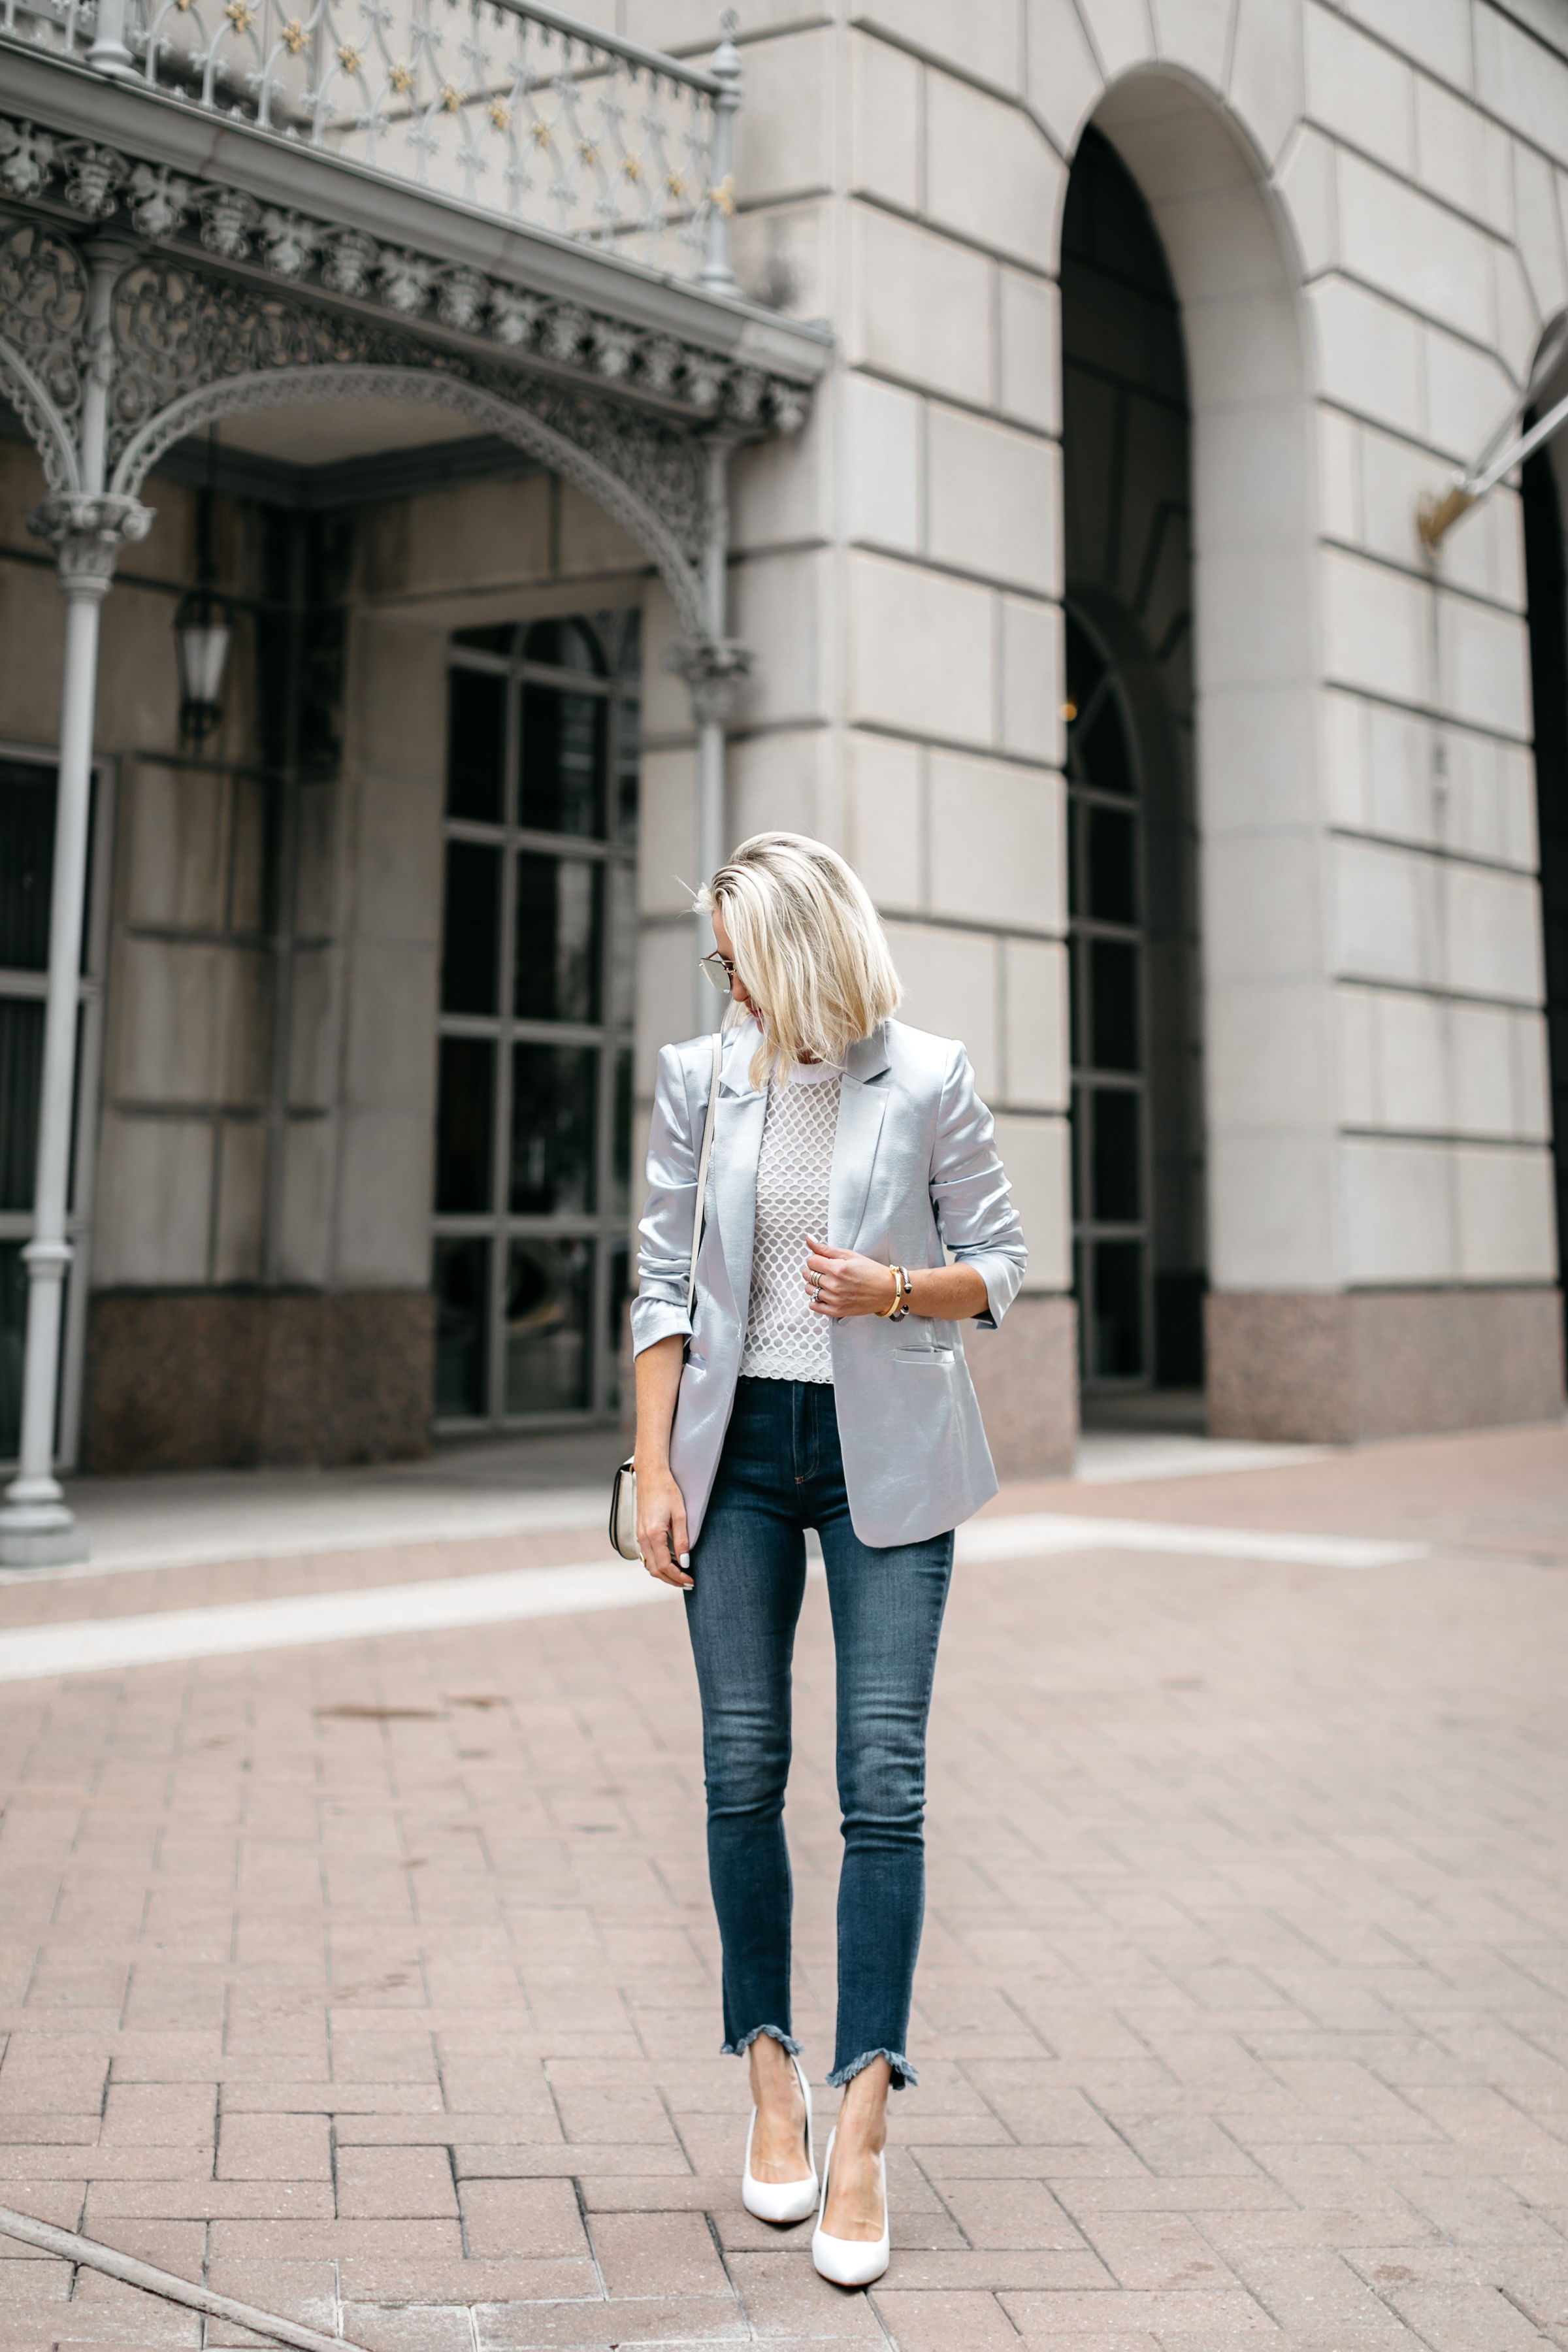 Erin Busbee of Busbee Style Over 40 Fashion Blogger wears the Kylie Satin blazer by Cinq a Sept on sale at Saks